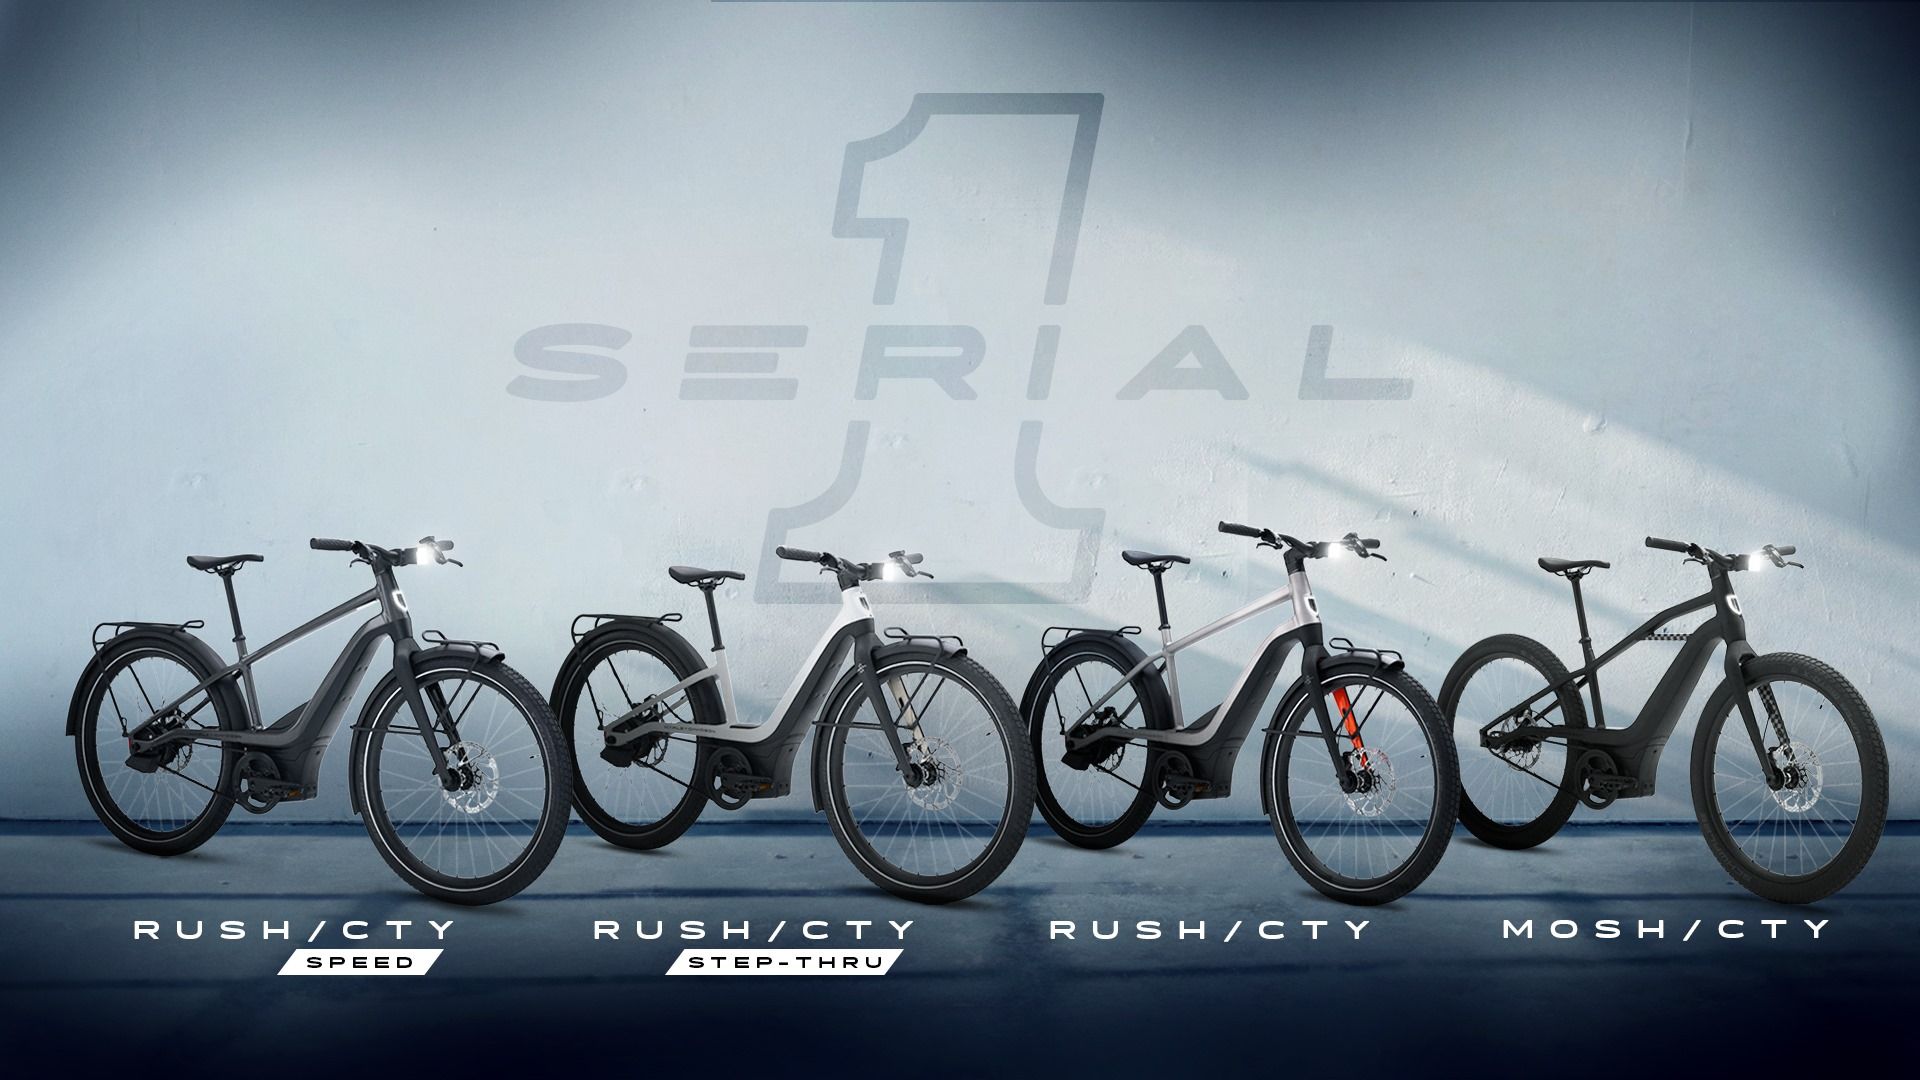 New To The Shop: Serial 1 Ebikes